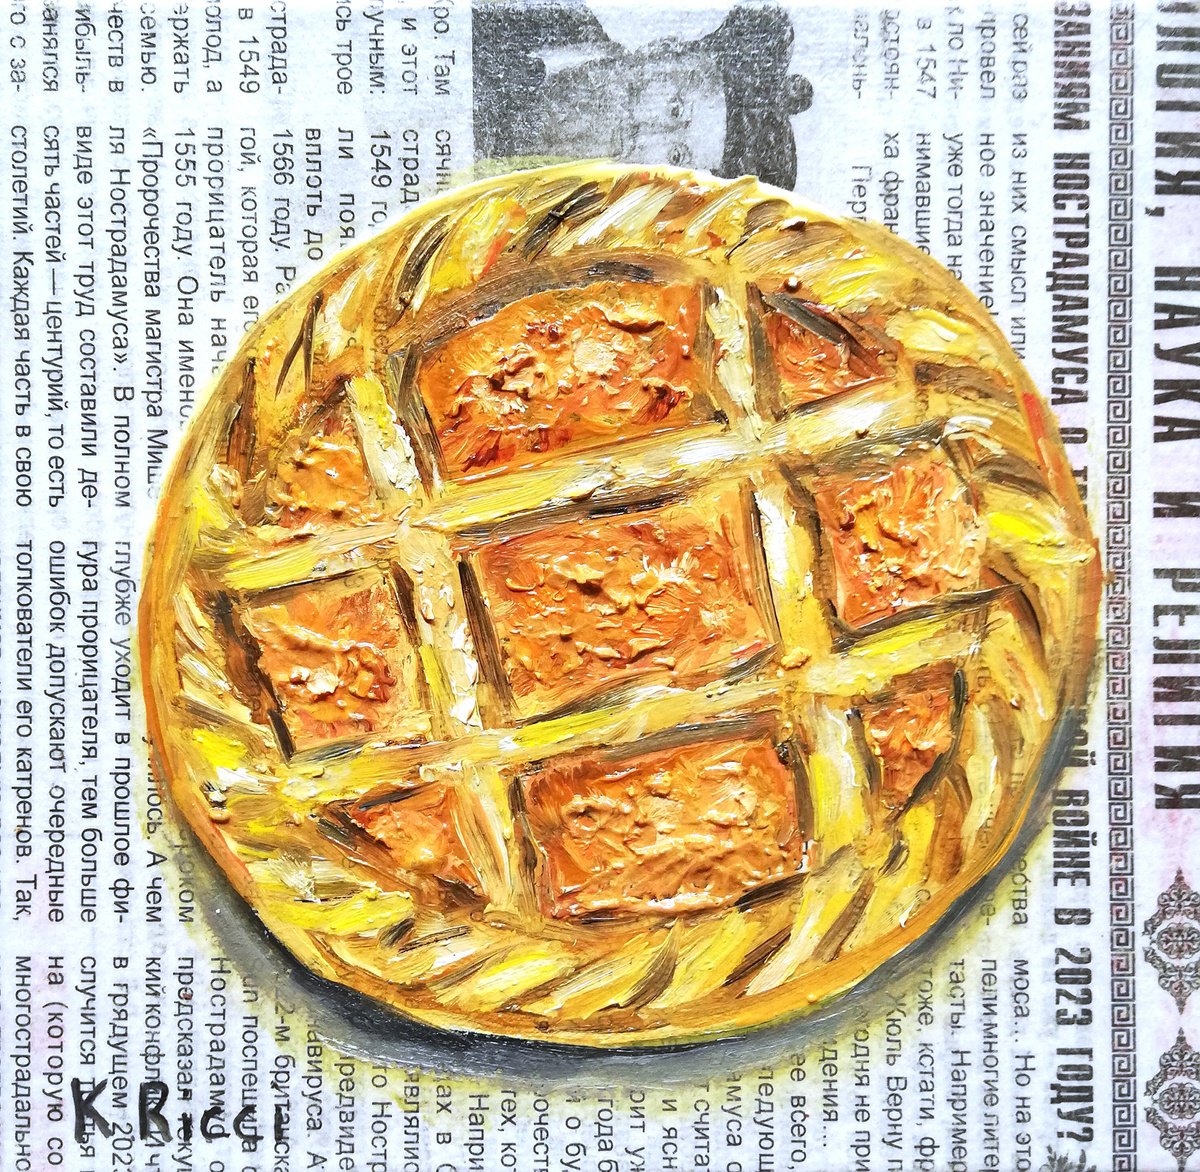 Apricot Jam Tartlet on Newspaper Original Oil on Canvas Board Painting 6 by 6 inches (15... by Katia Ricci